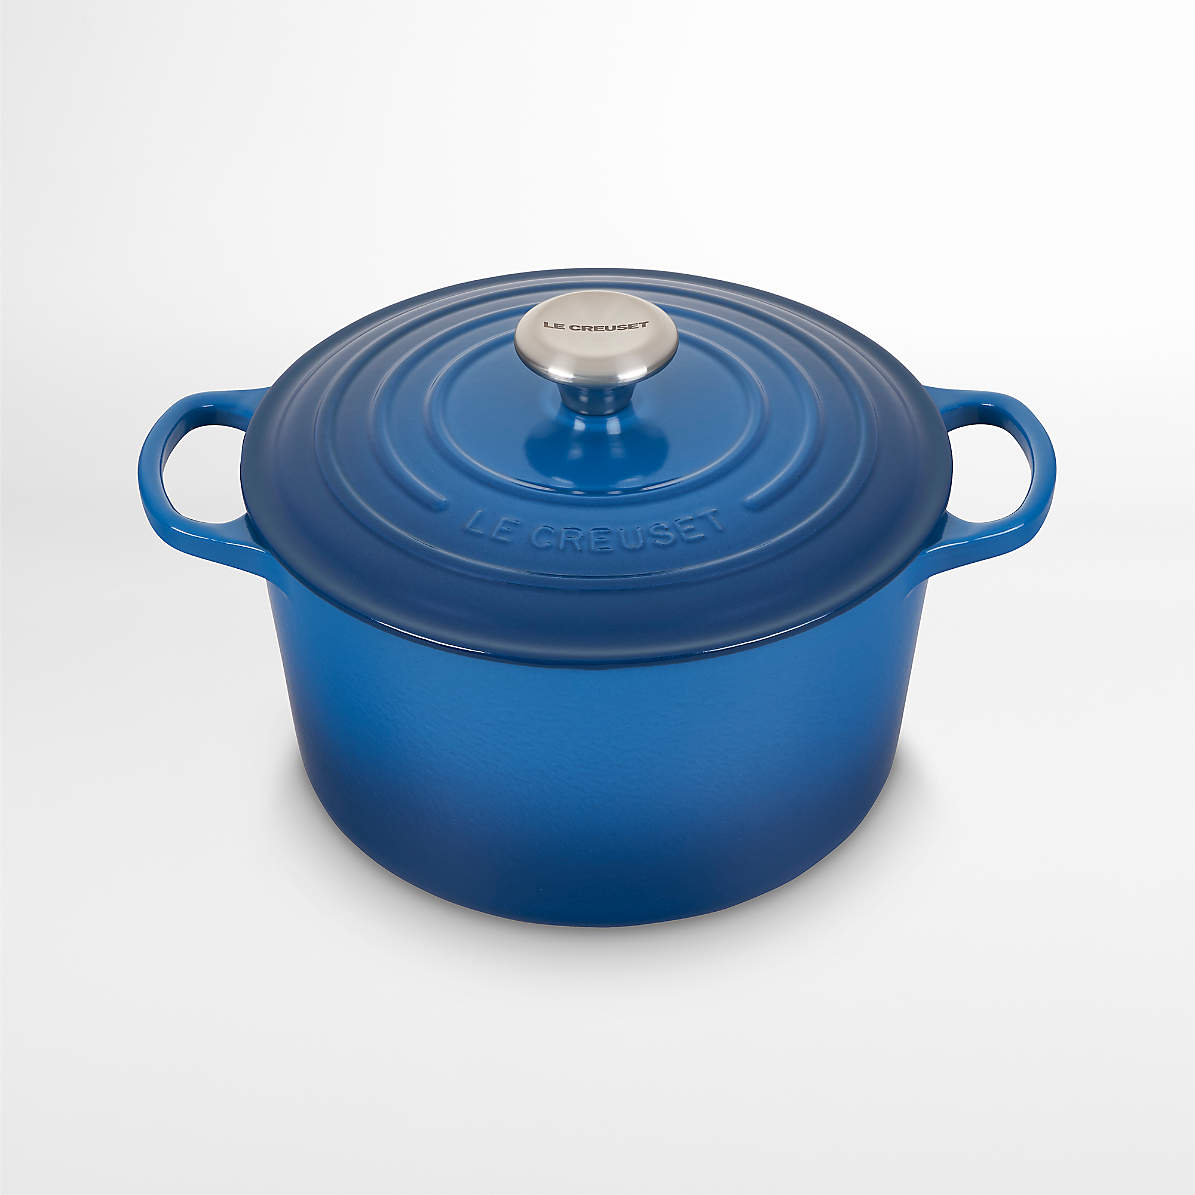 Vintage Le Creuset 22 Blue 3.5 Qt Dutch Oven Enameled Cast Iron Made in  France in Marseille 